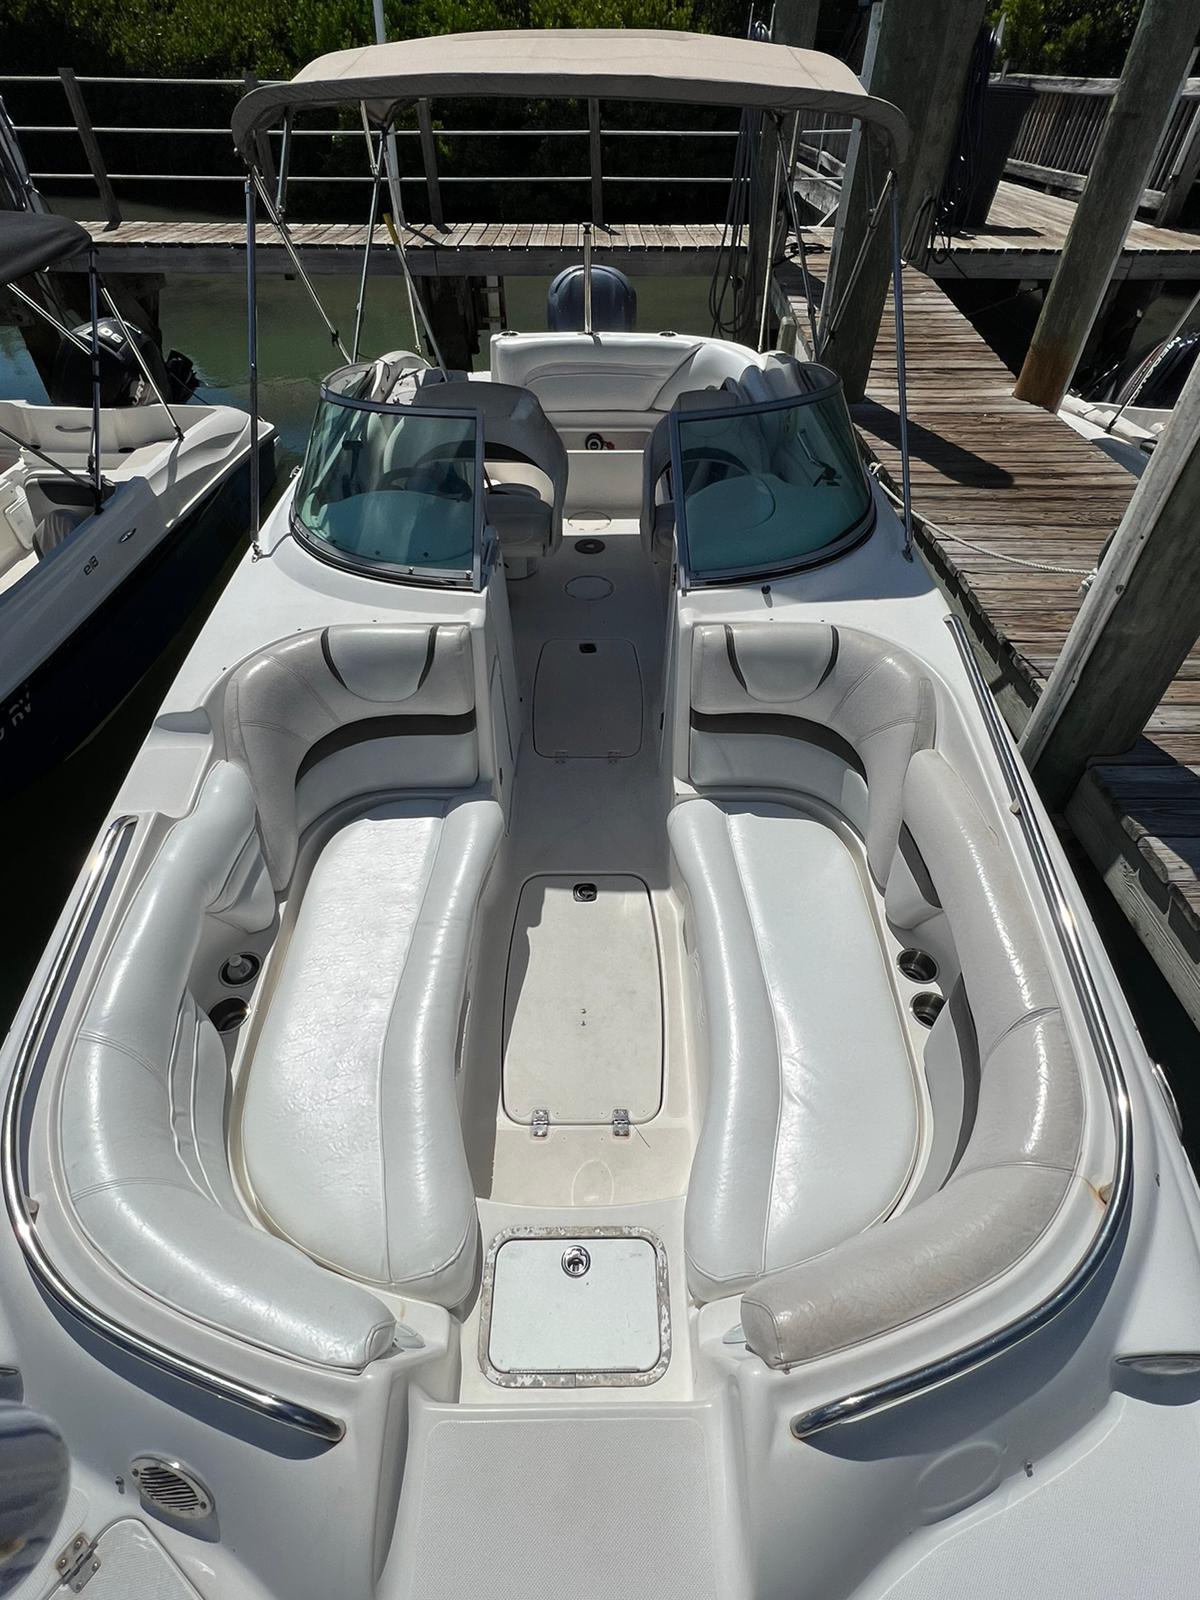 2012 Hurricane 2400 Dual Console for sale - YachtWorld